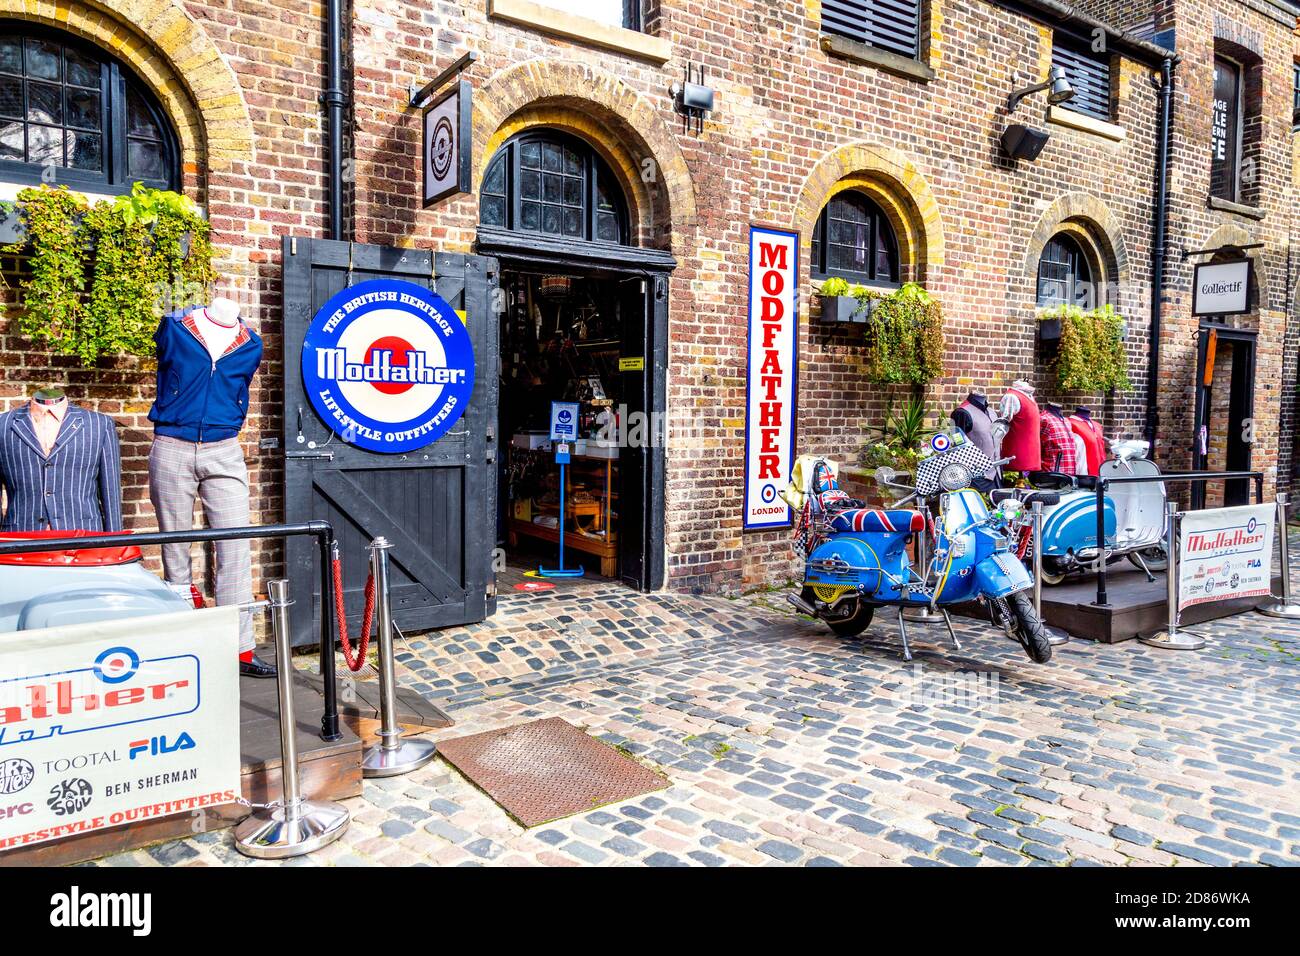 Exterior of Modfather shop in Camden Stables Market, London, UK Stock Photo